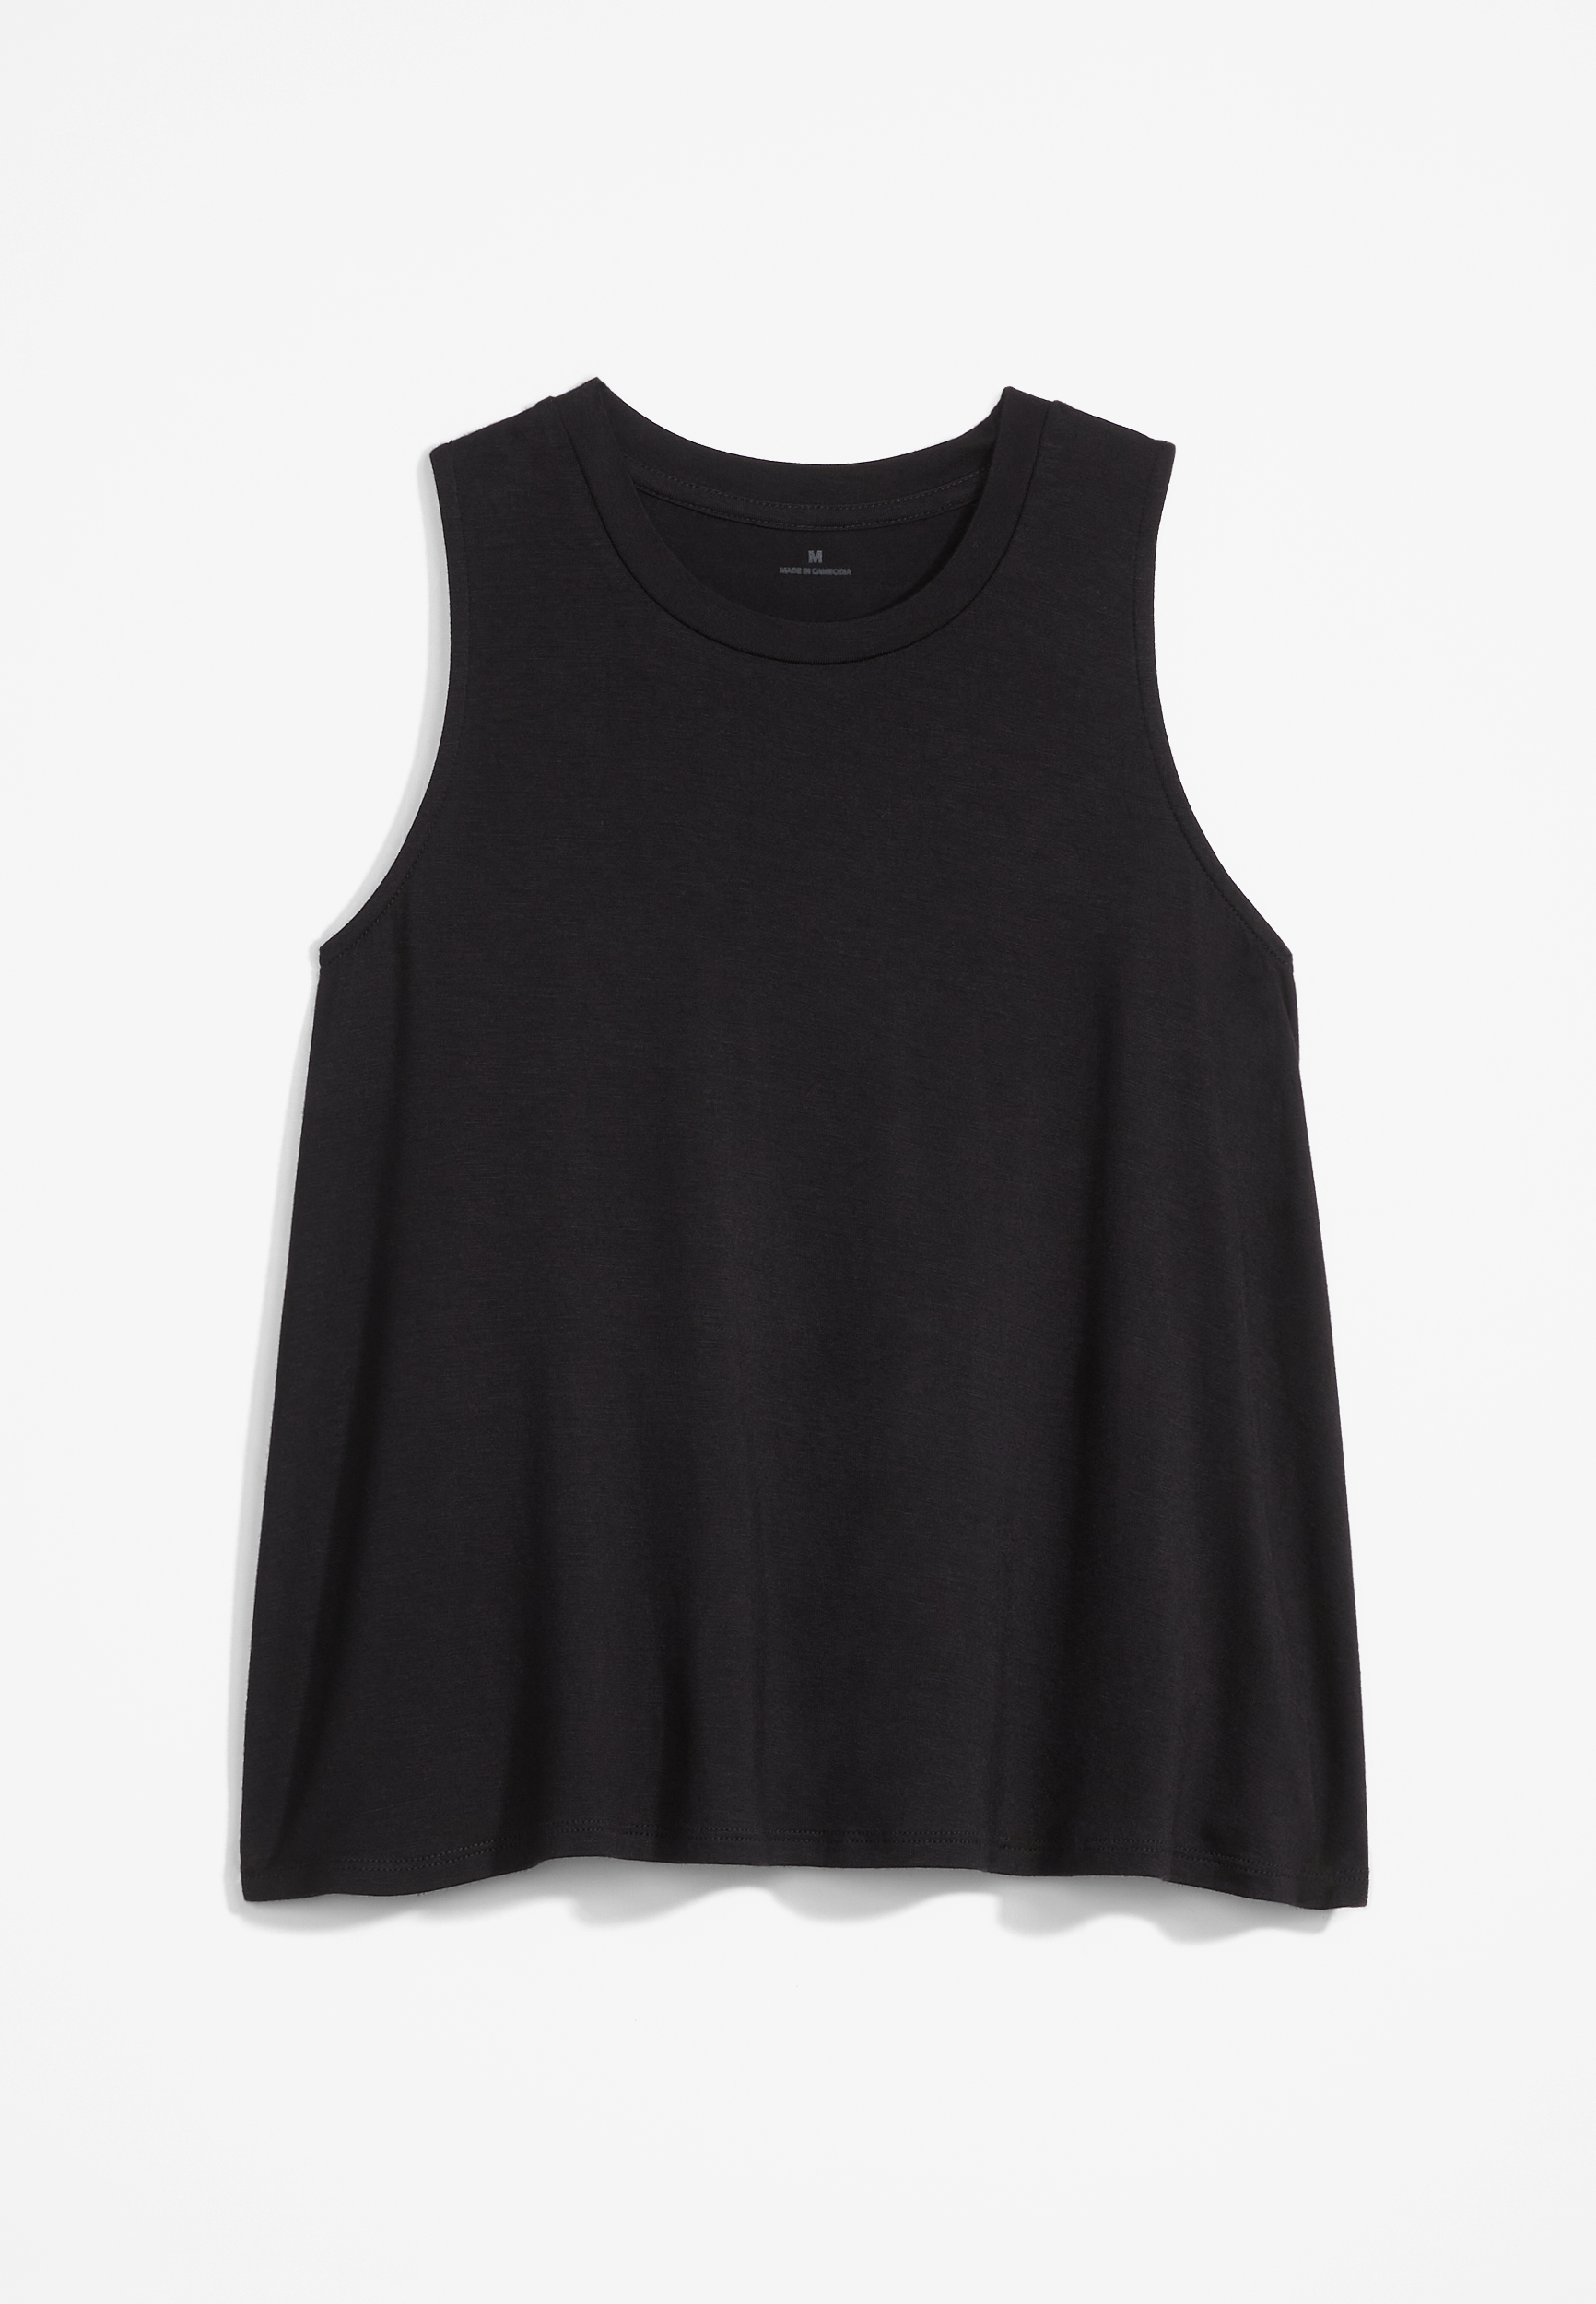 Girls Solid High Neck Tank Top | maurices